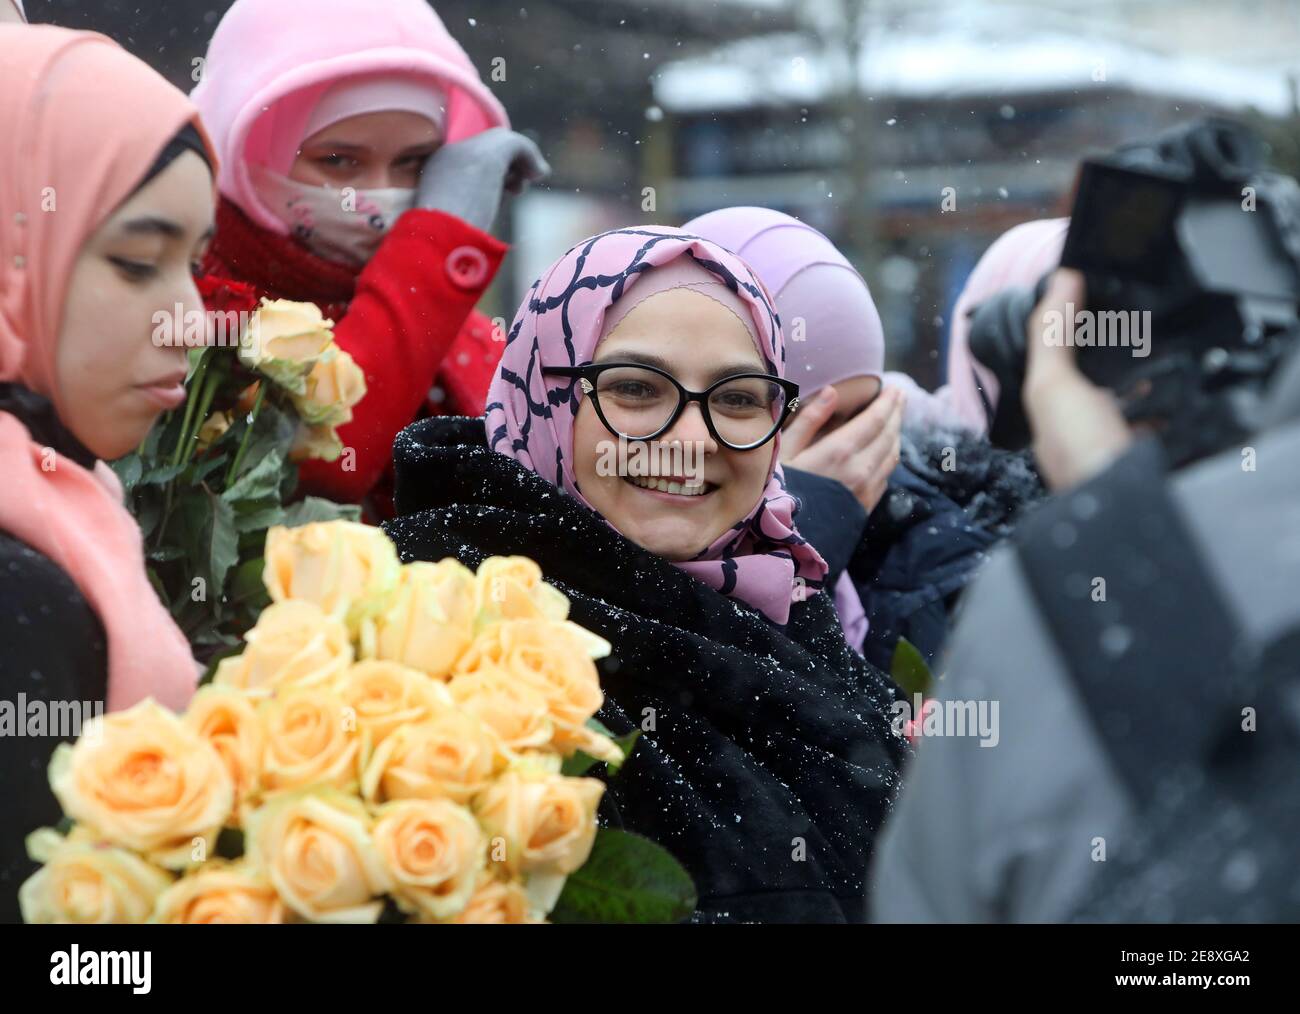 Non Exclusive: KYIV, UKRAINE - FEBRUARY 1, 2021 - A woman smiles during an action on Khreshchatyk Street on World Hijab Day, Kyiv, capital of Ukraine. Stock Photo